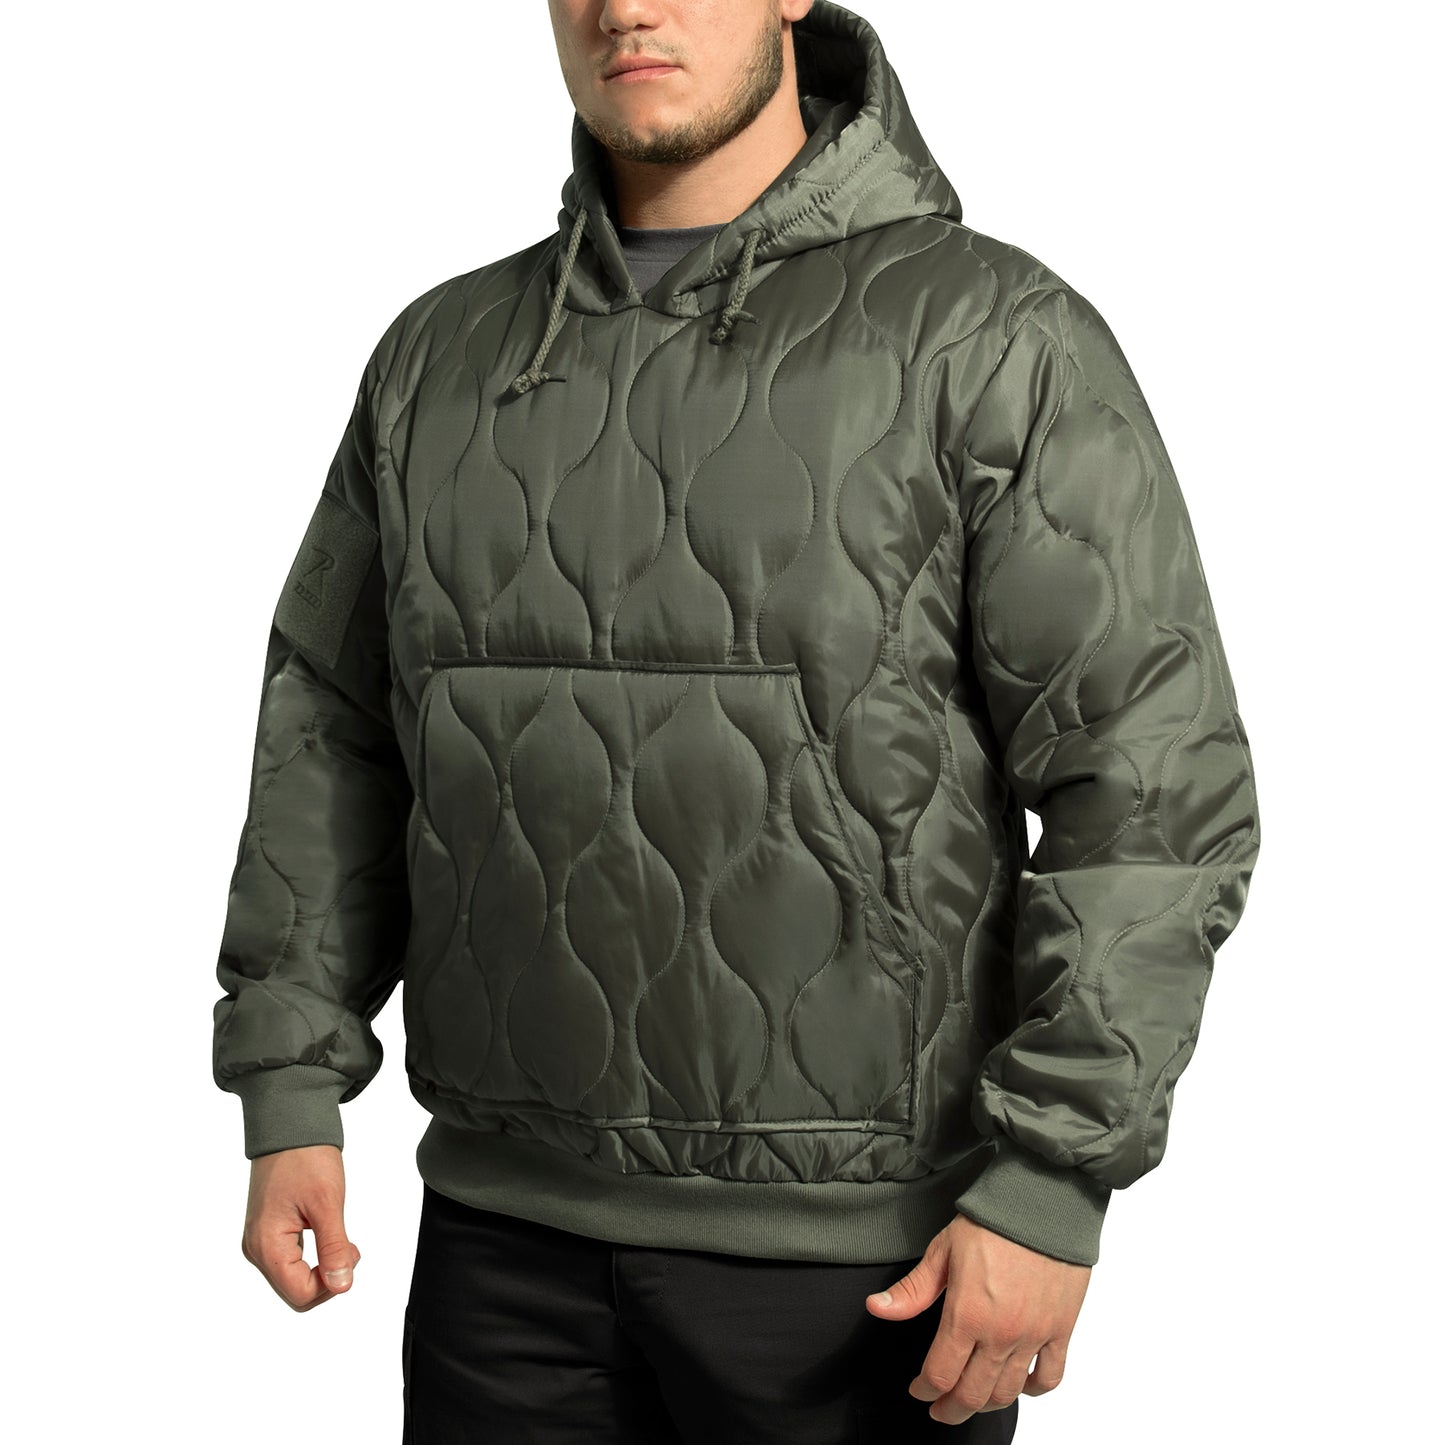 Rothco Quilted Woobie Hooded Sweatshirt